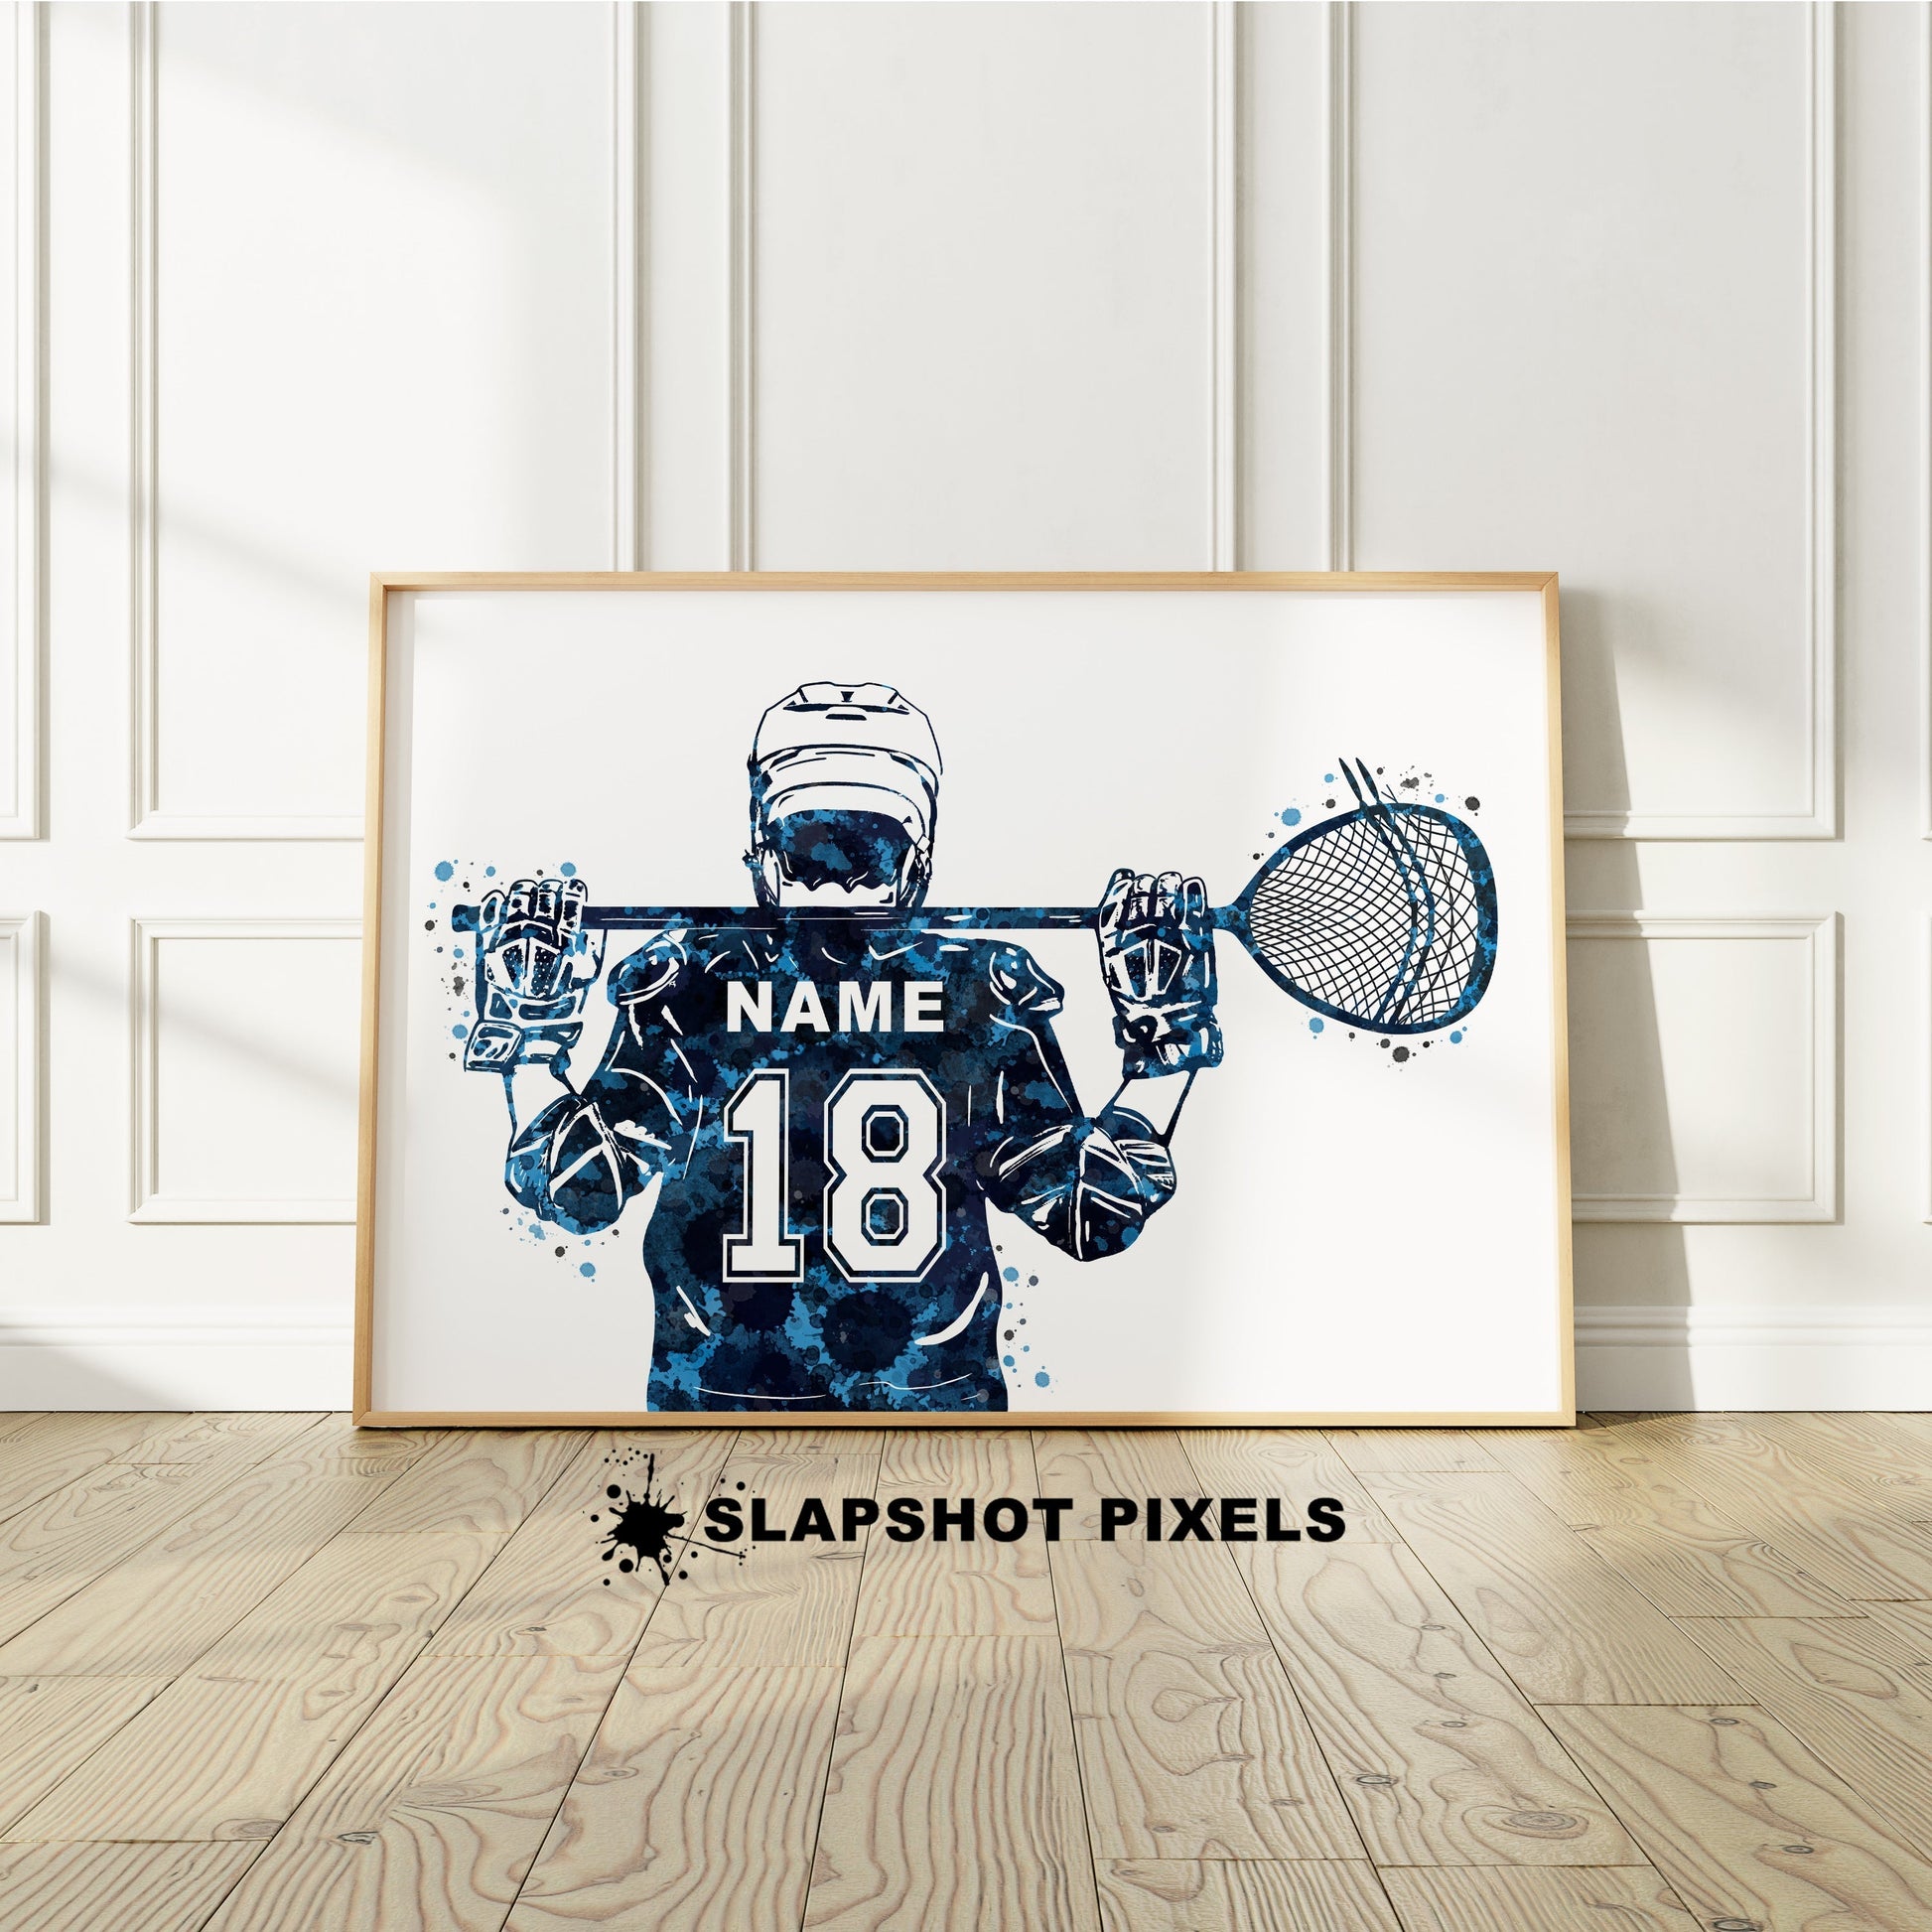 Personalized lacrosse goalie poster showing back of a boy lacrosse player with custom name and number on the lacrosse jersey. Designed in watercolor splatters. Perfect lacrosse gifts for boys, lacrosse goalie prints, lacrosse team gifts, lacrosse coach gift, lacrosse wall art décor in a lacrosse bedroom and birthday gifts for lacrosse players.